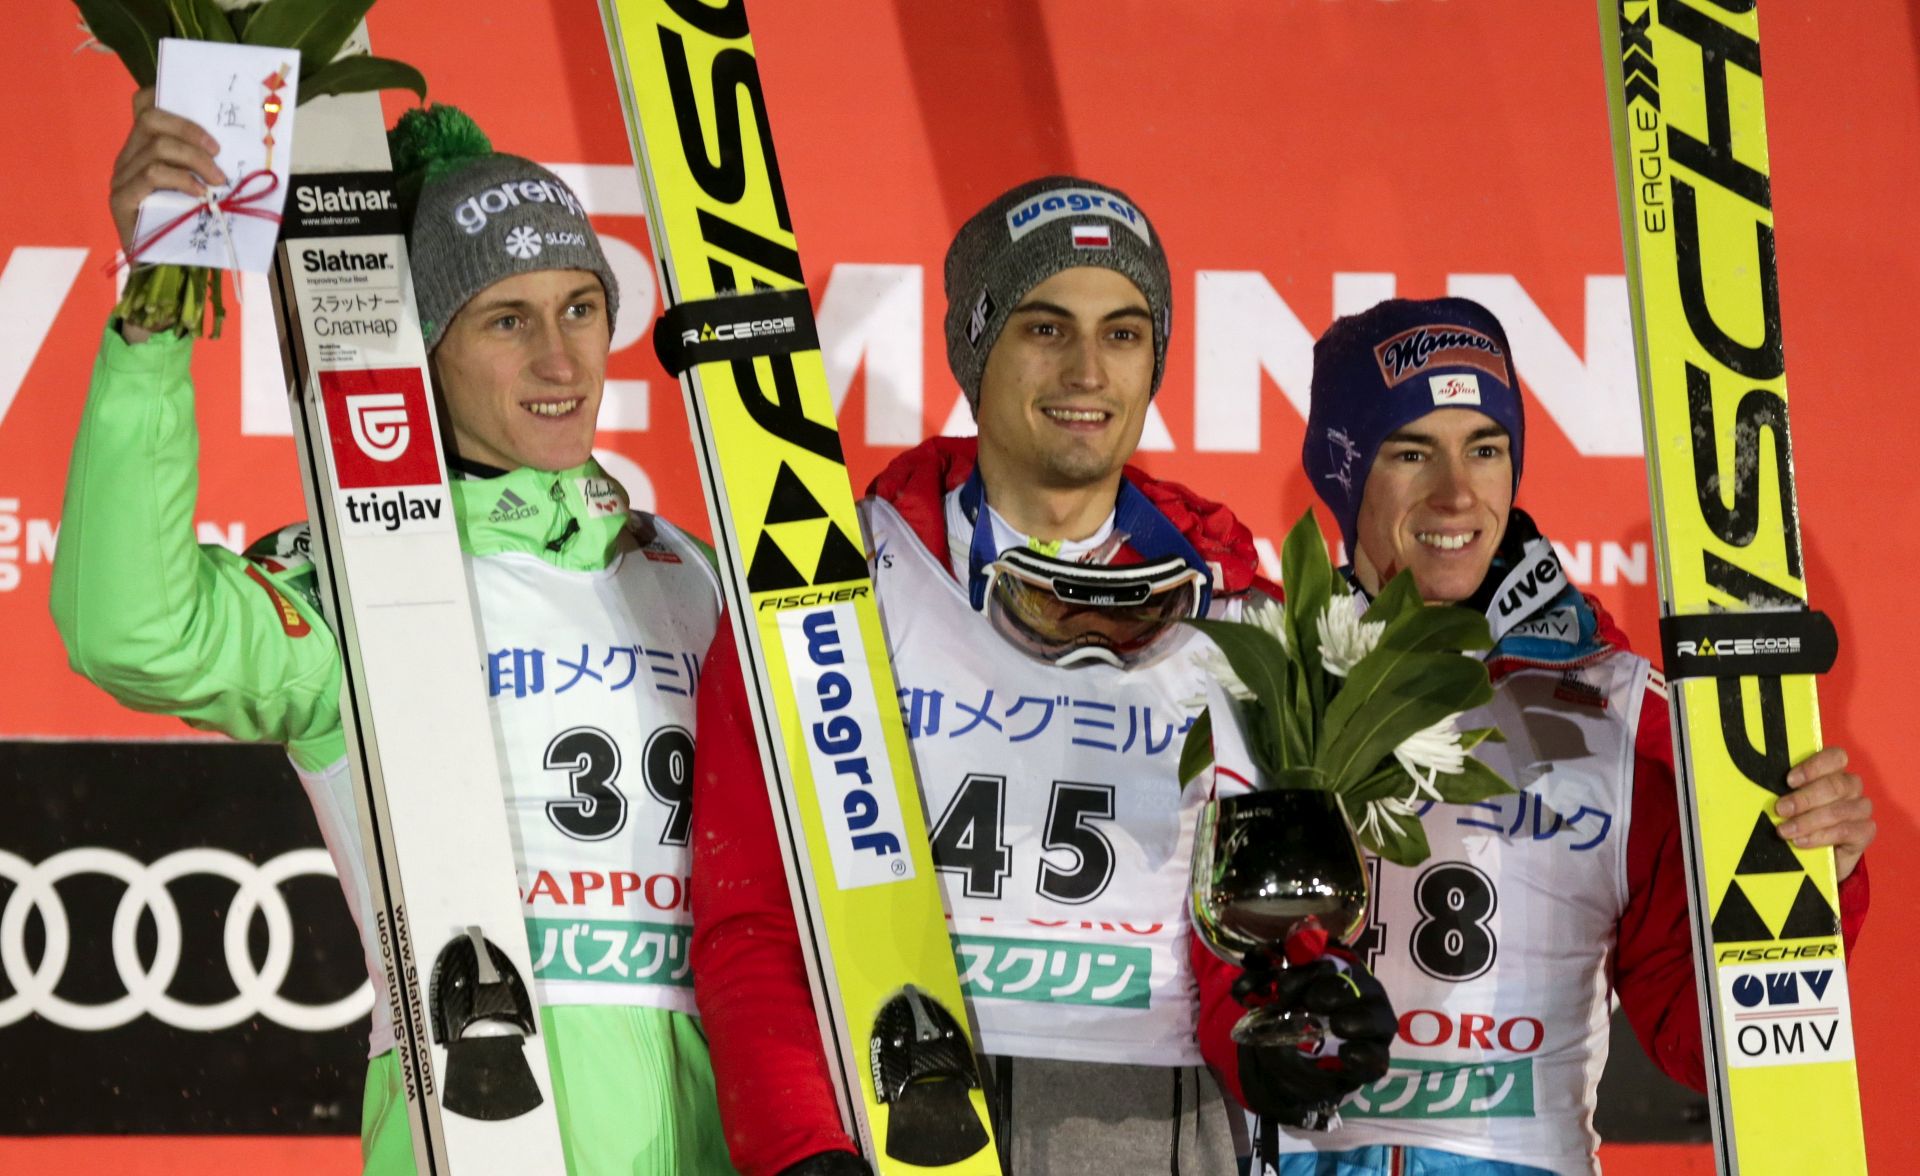 epa05784656 (L-R) joint winners Peter Prevc of Slovenia and Maciej Kot of Poland, and third placed  Stefan Kraft of Austria celebrate on the podium for the large hill individual competition at the Ski Jumping World Cup in Sapporo, Japan, 11 February 2017.  EPA/KIMIMASA MAYAMA